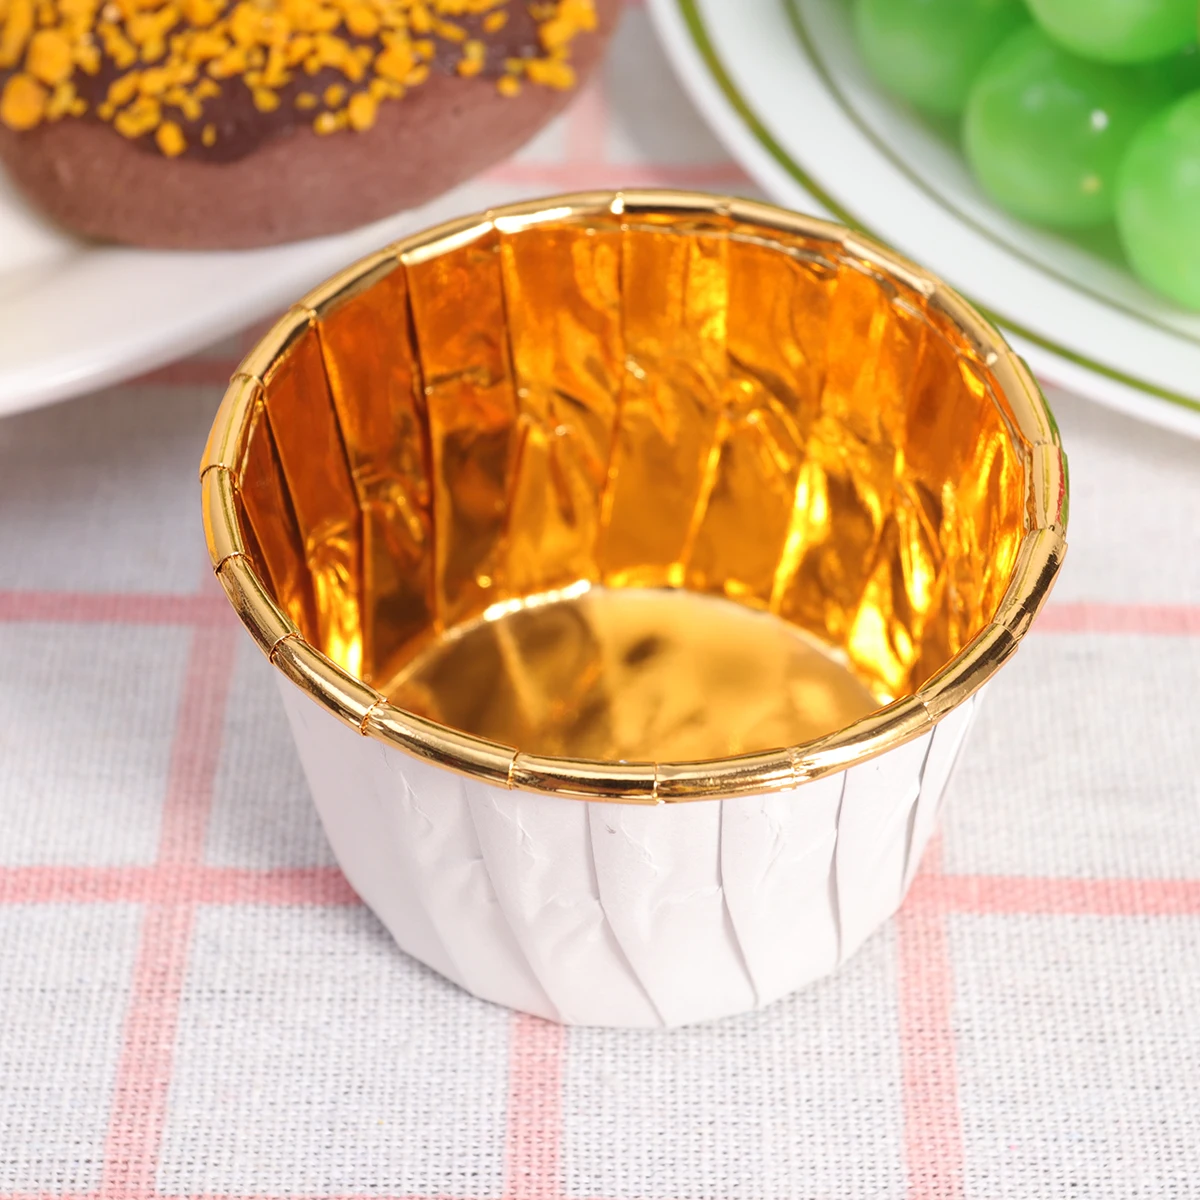 100pcs Disposable Curled Baking Cake Cups Heat-Resistant Paper Muffin Cupcake Paper Cups Baking Cupcake Wrappers Cake Wrapper